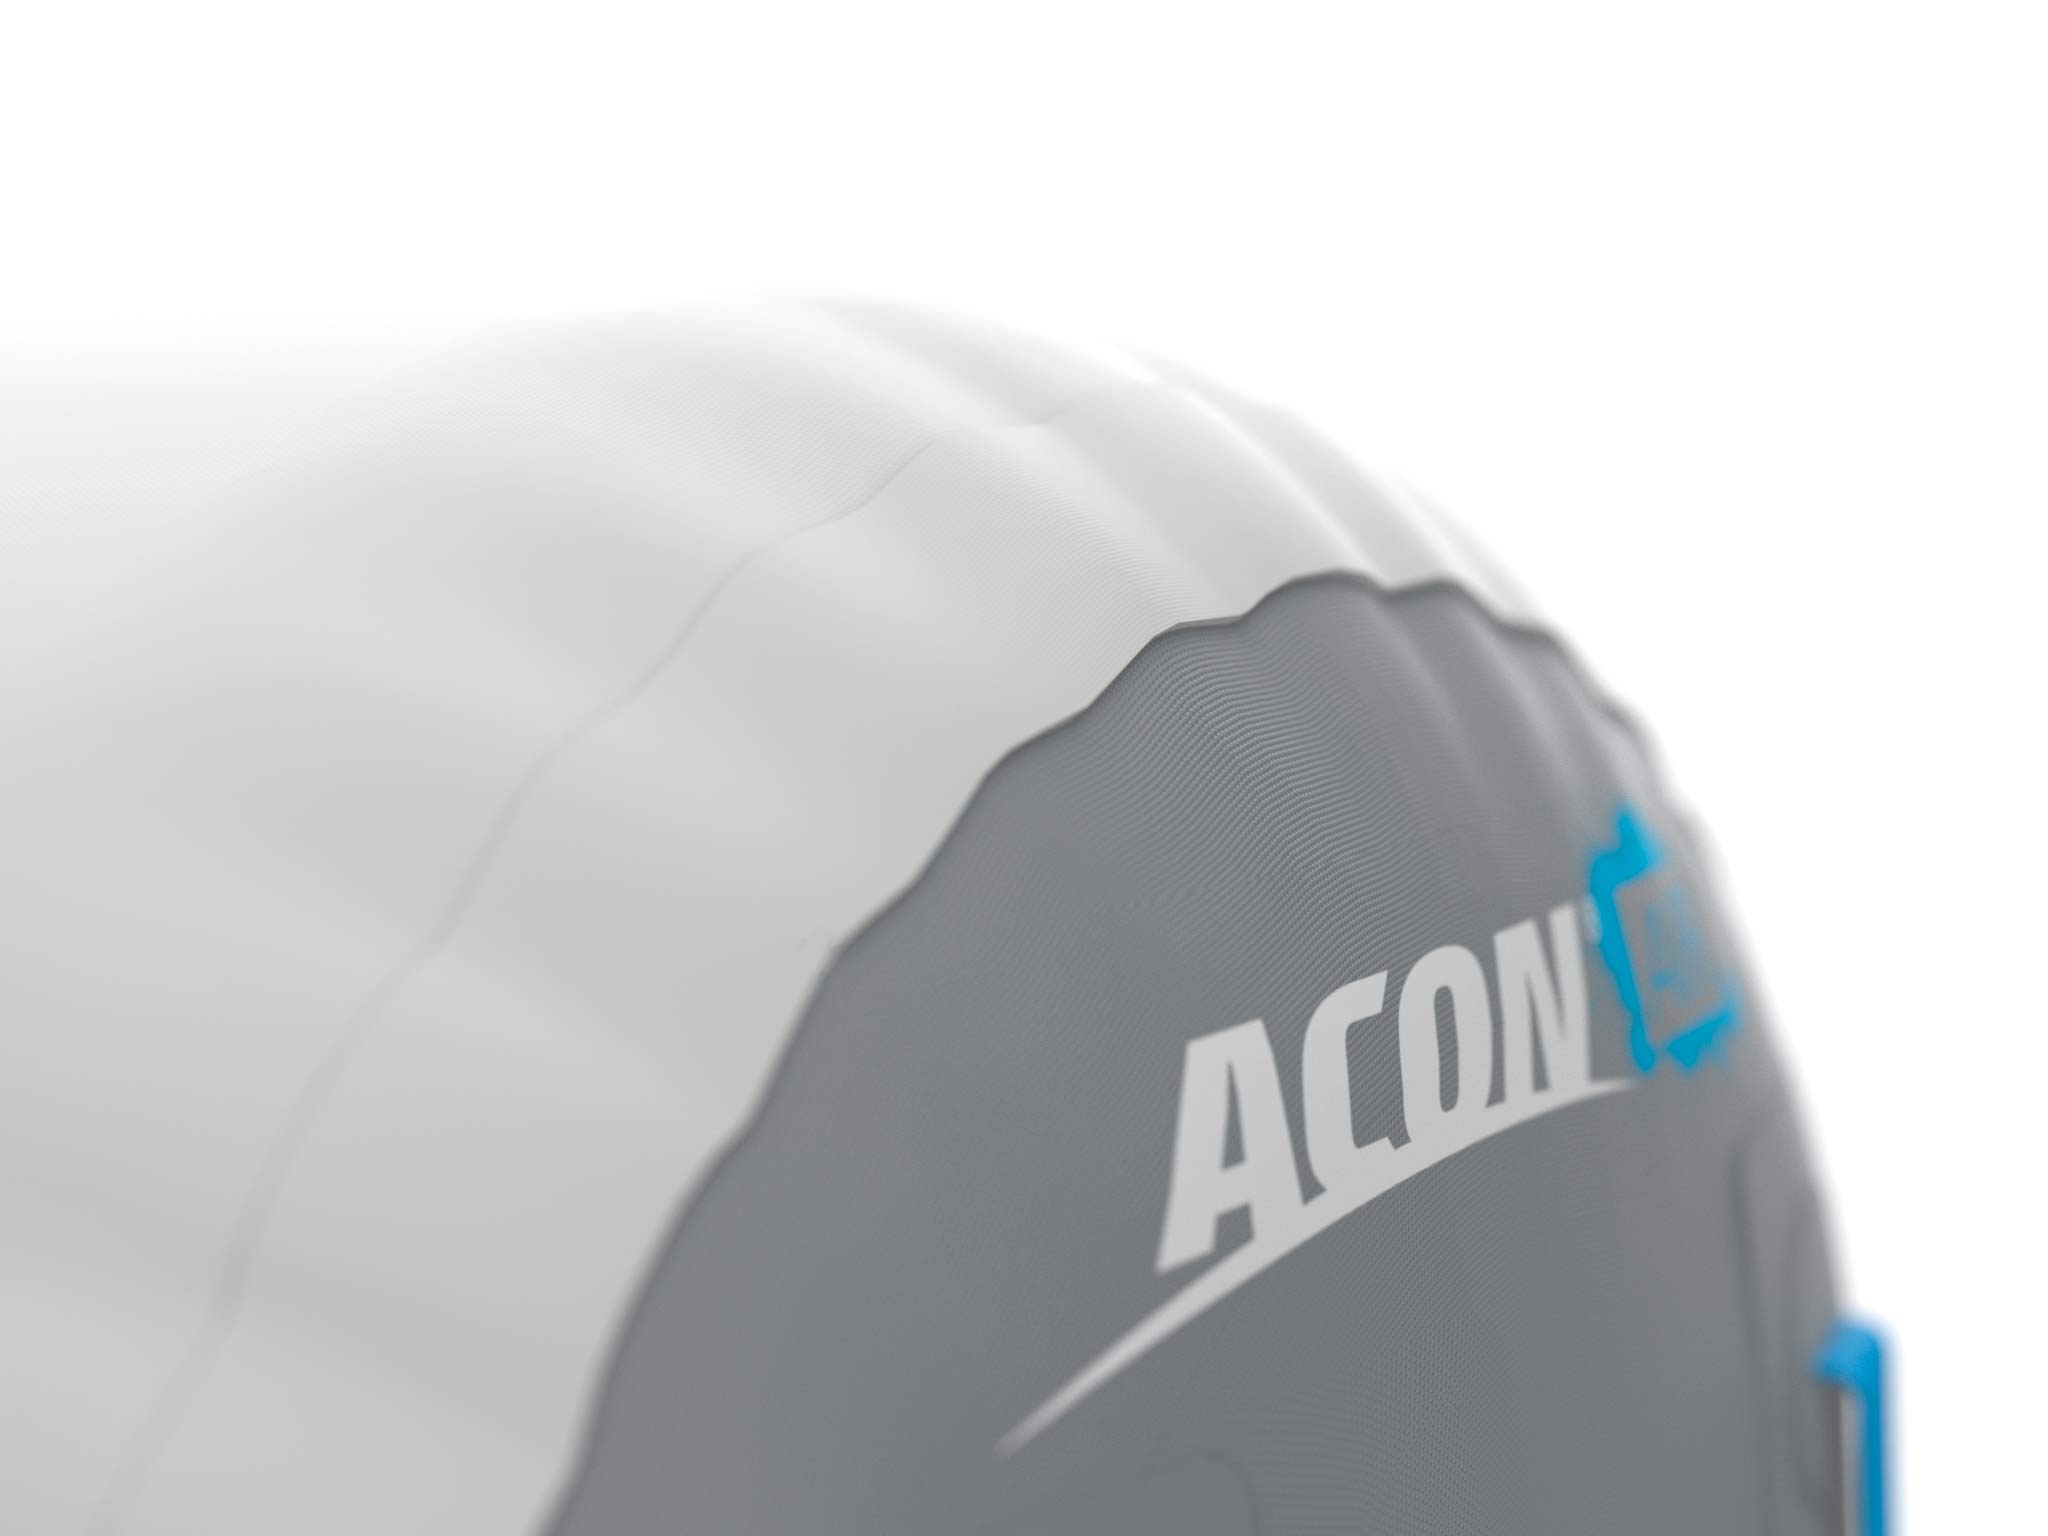 ACON AirRoll for Tricking and Gymnastics 0,6 x 1,2m - Détails Logo ACON